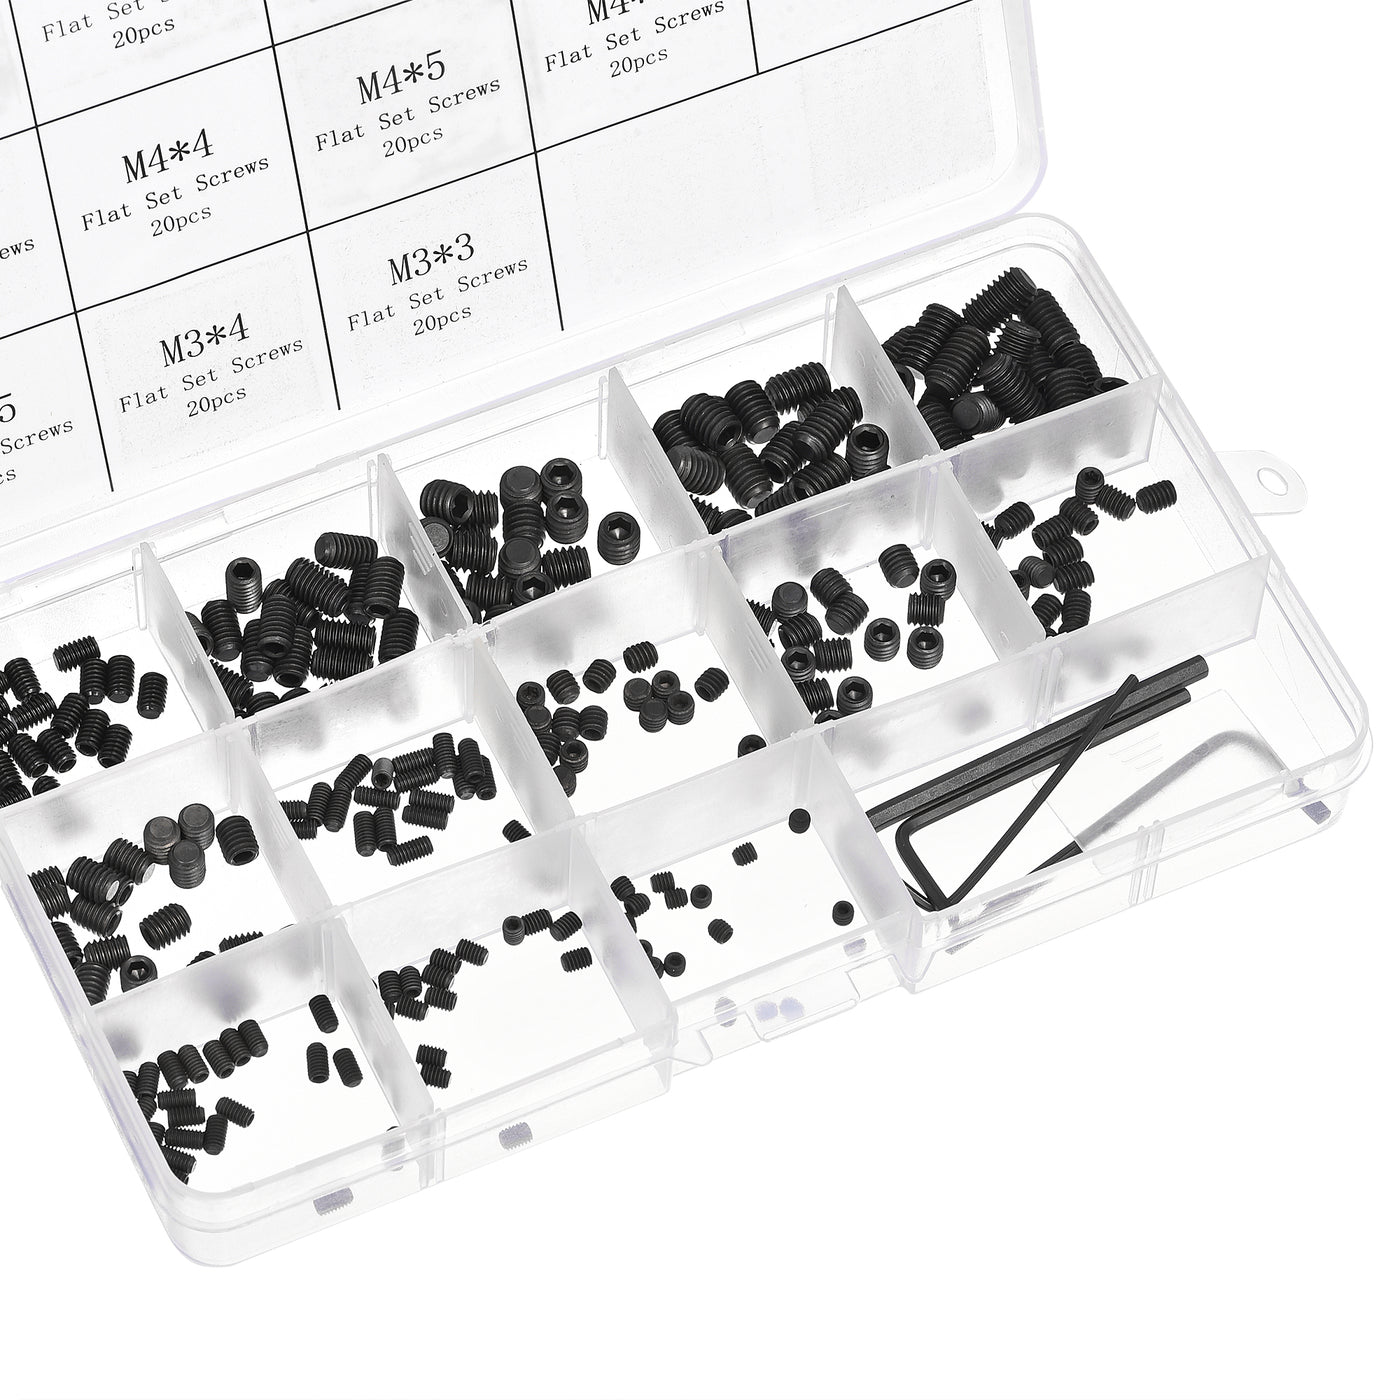 uxcell Uxcell Hex Socket Set Grub Screws, M3/M4/M5/M6 Metric Carbon Steel Flat Point Set Screws Assortment Kit with 4 Hex Wrenches 1set